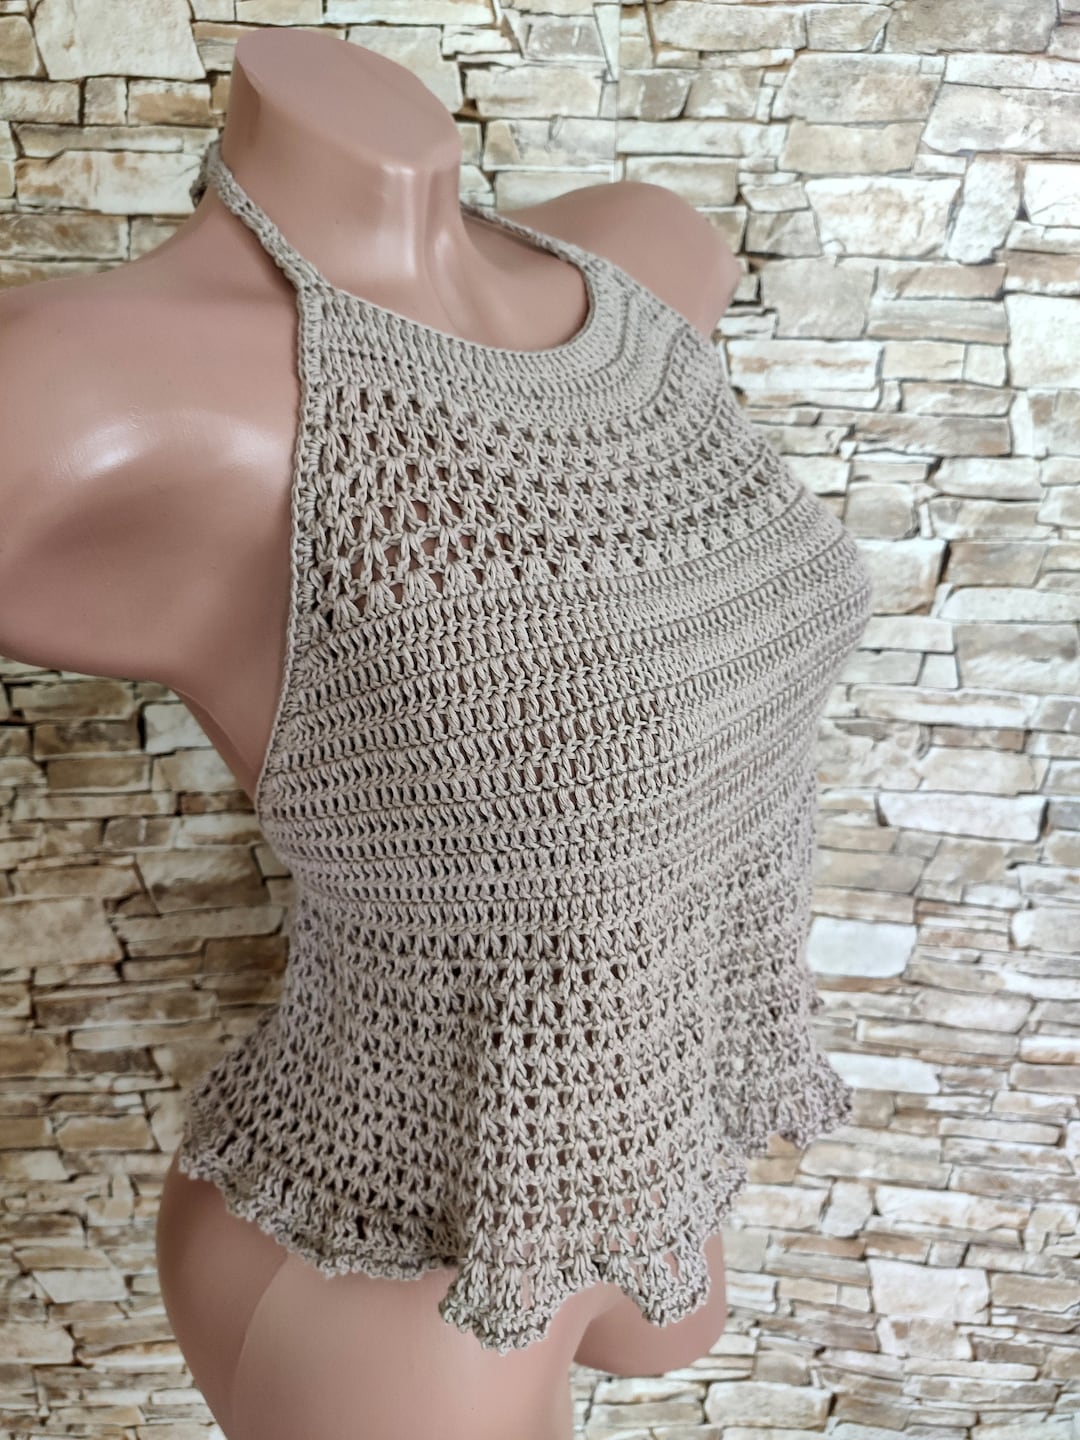 Taupe Crochet Halter Top Beach Clothing for Women's - Etsy